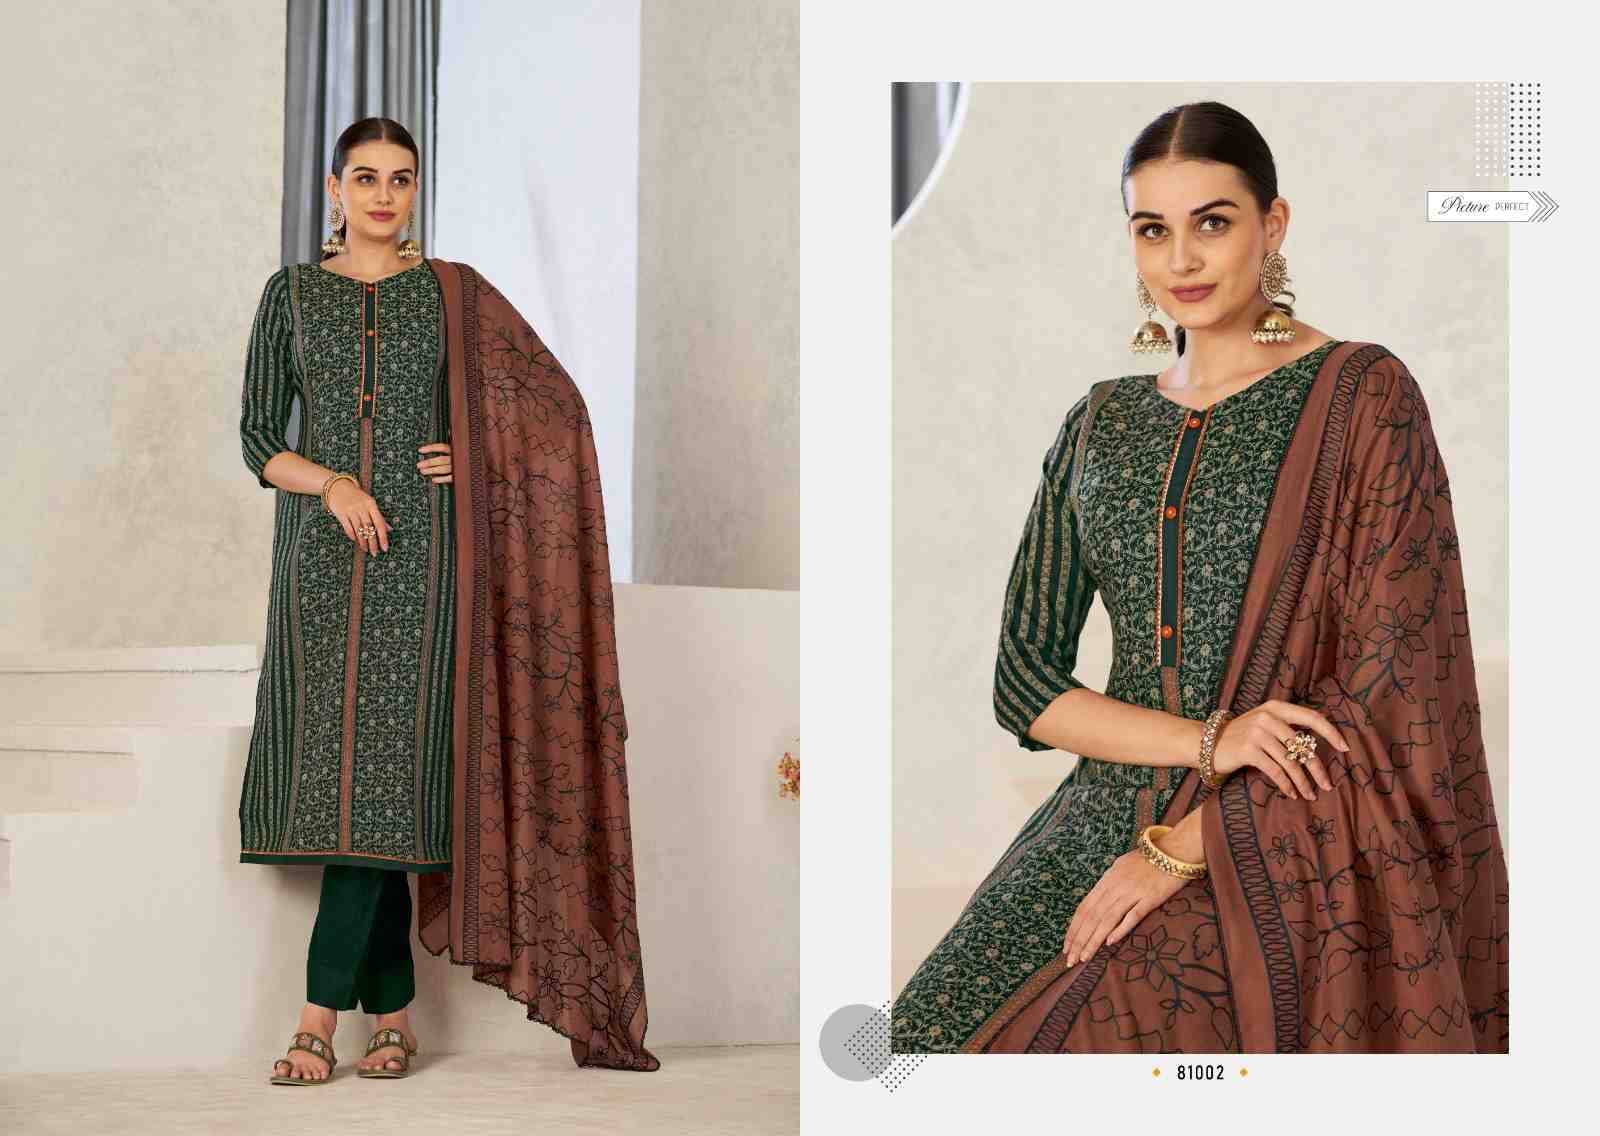 Black Berry Vol-4 By Azara 81001 To 81004 Series Beautiful Stylish Festive Suits Fancy Colorful Casual Wear & Ethnic Wear & Ready To Wear Cotton Print Dresses At Wholesale Price